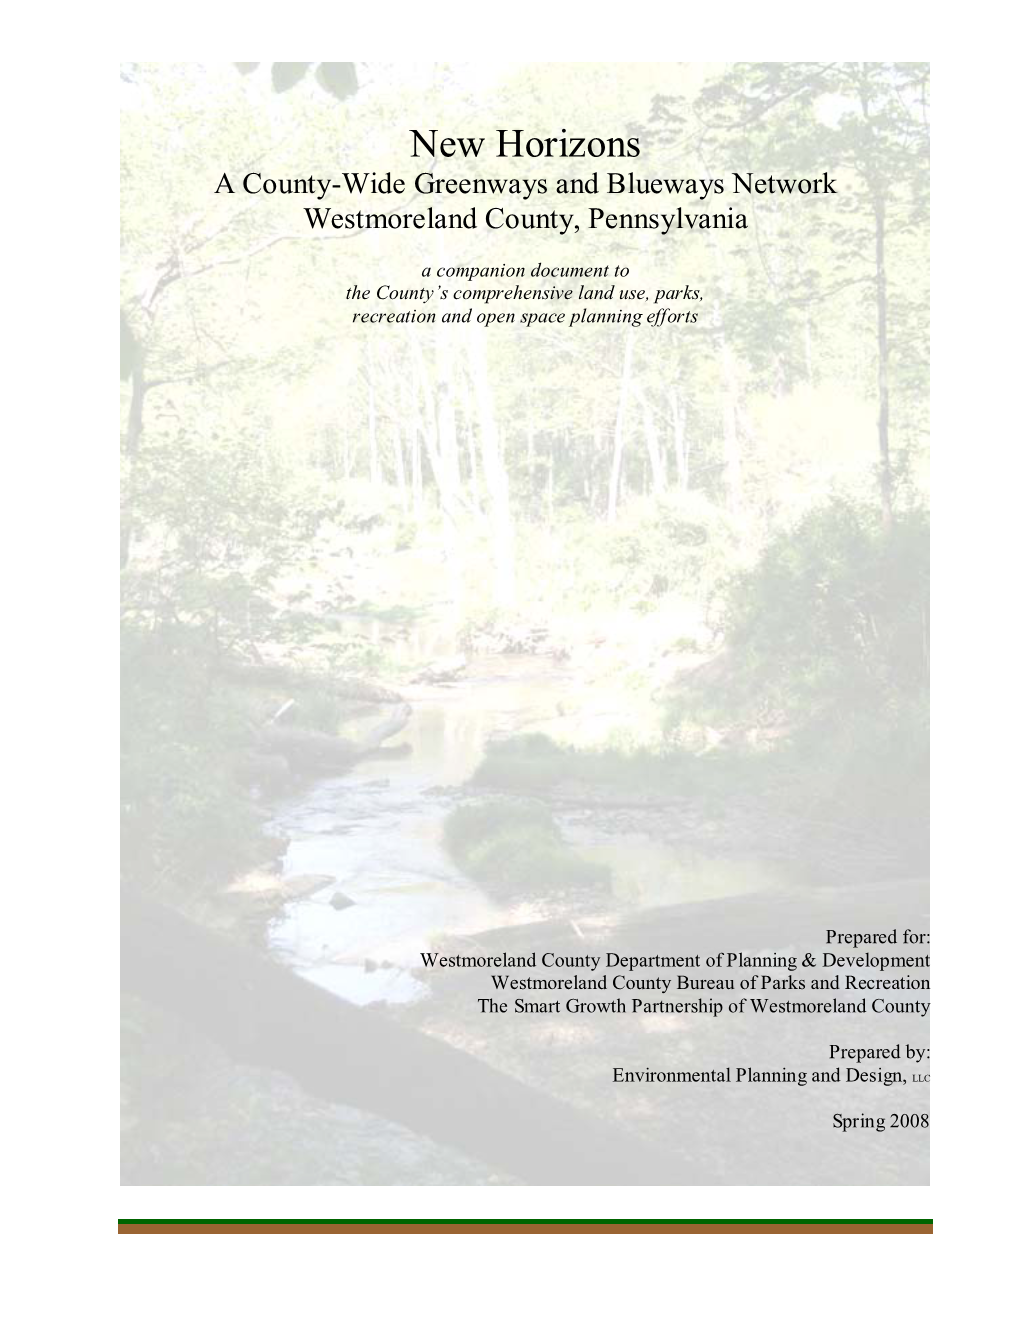 New Horizons a County-Wide Greenways and Blueways Network Westmoreland County, Pennsylvania